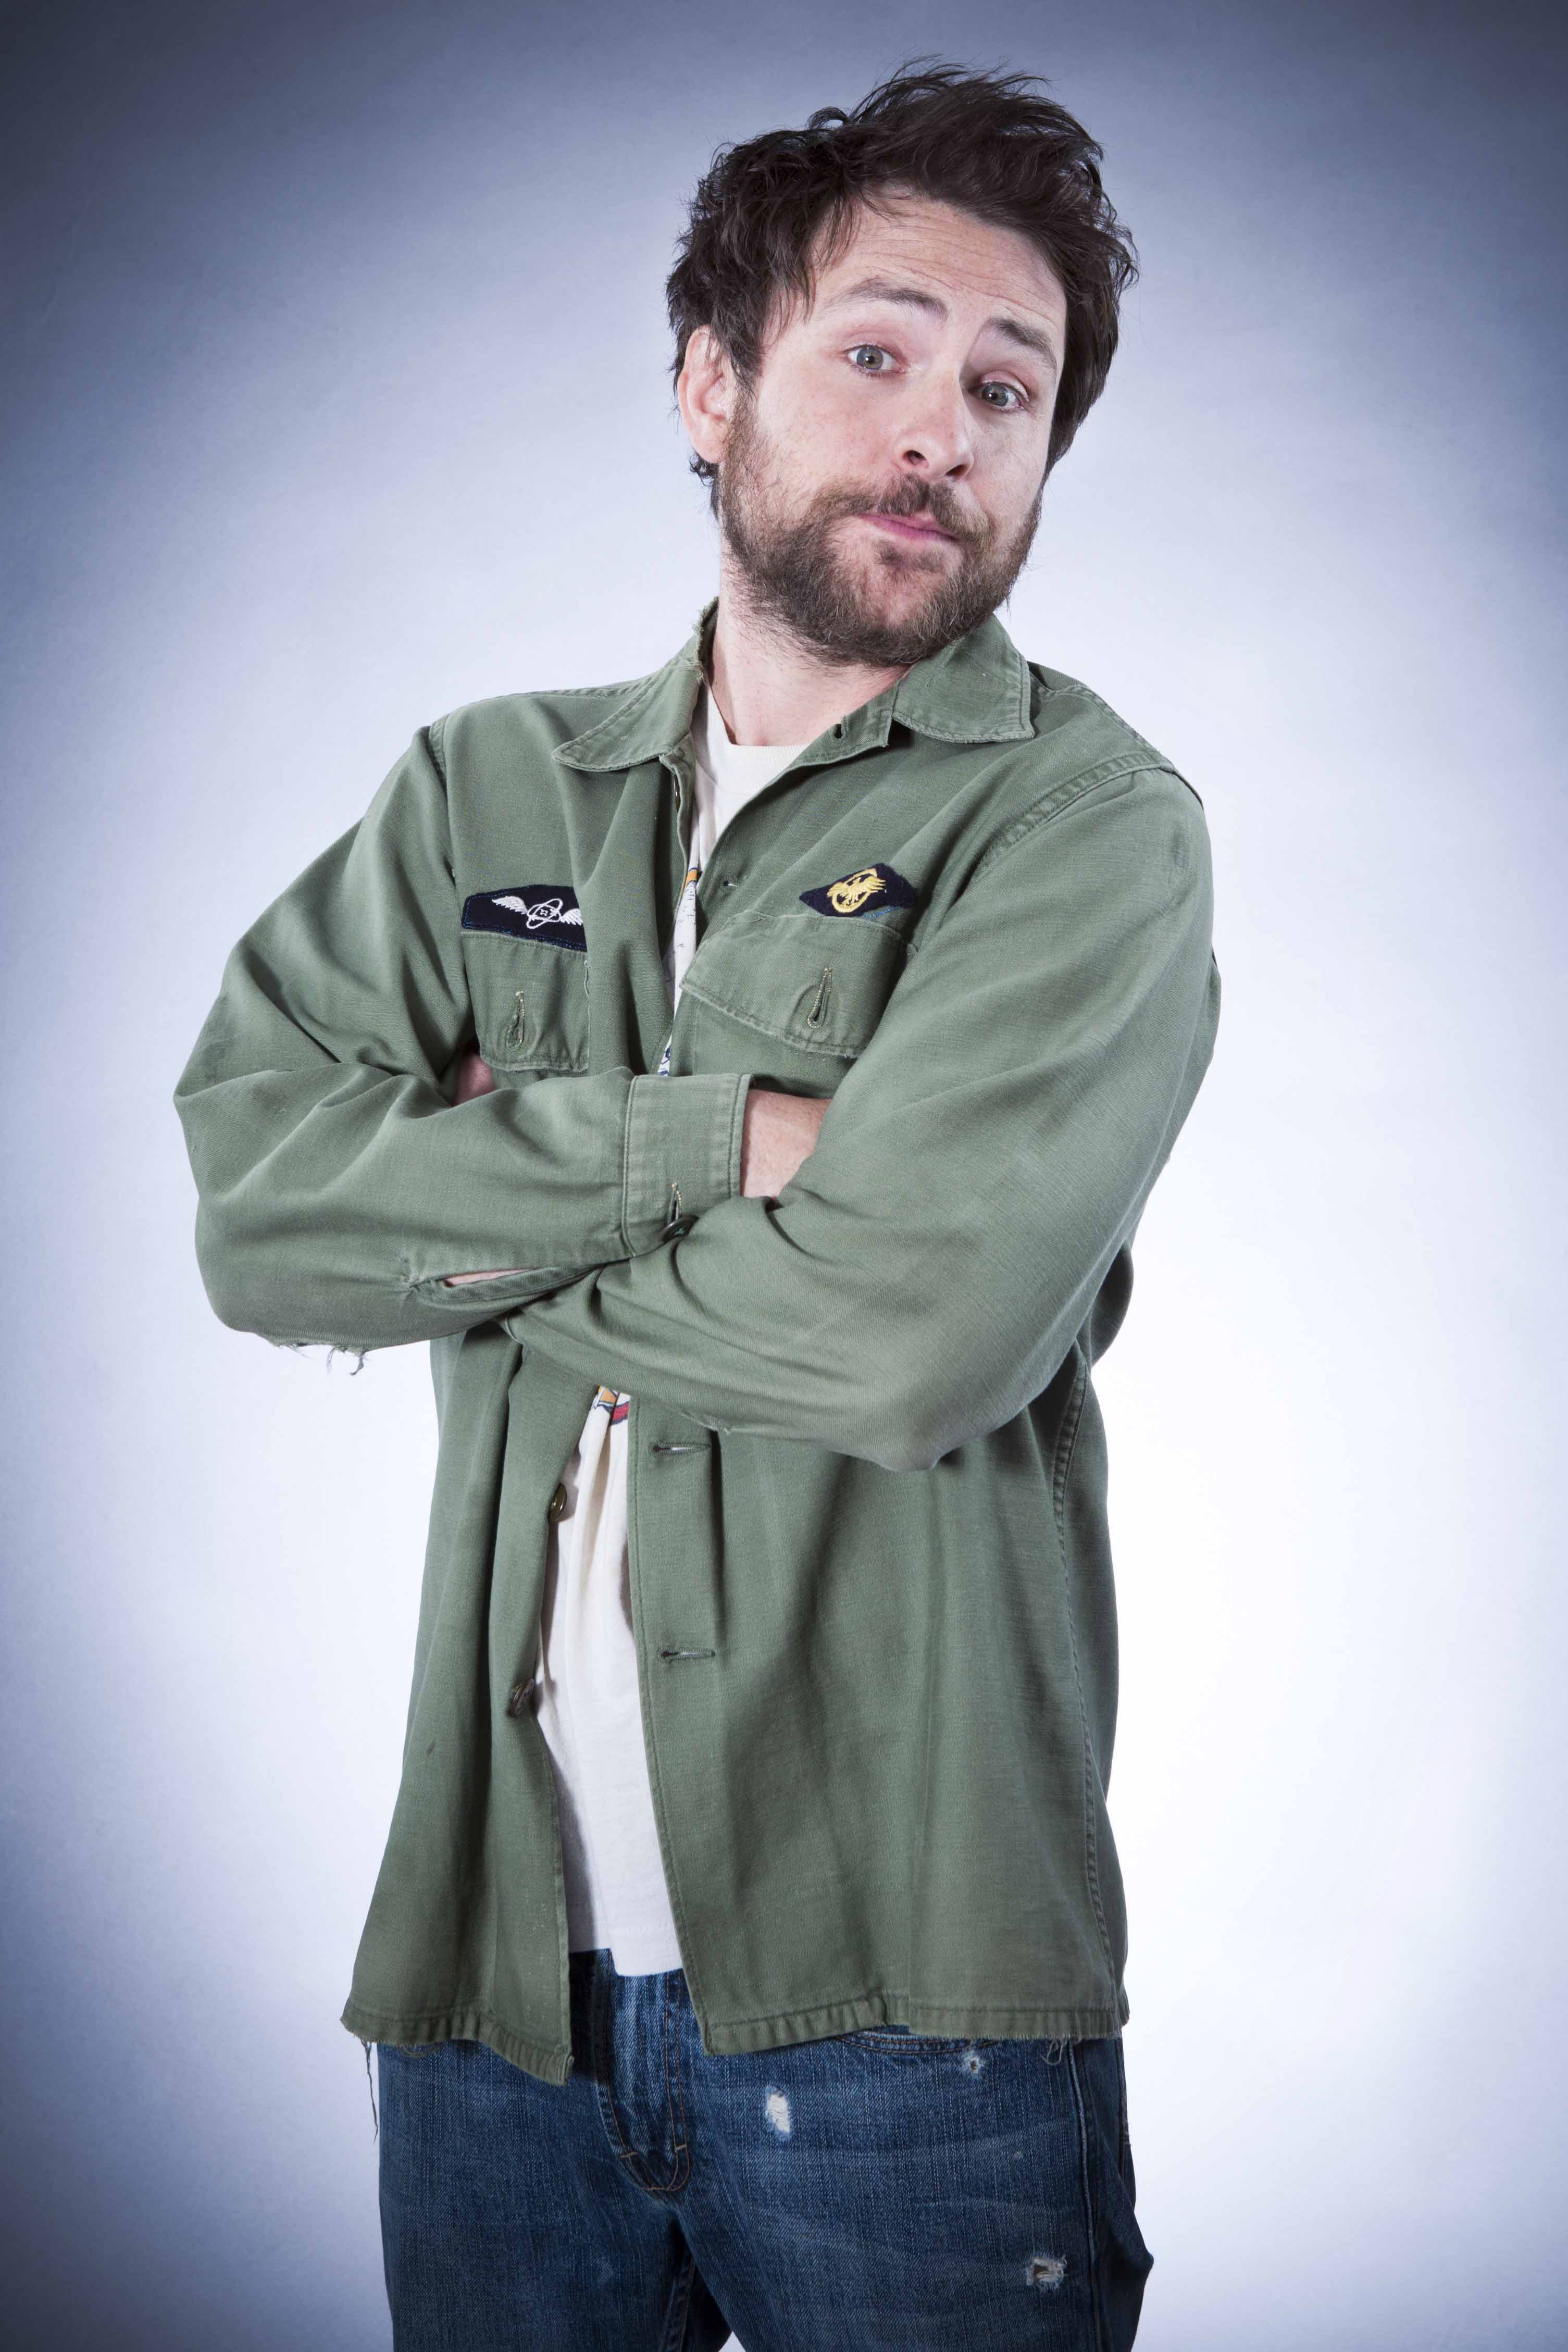 Charlie Day Says It's Always Sunny in Philadelphia Is Ready for